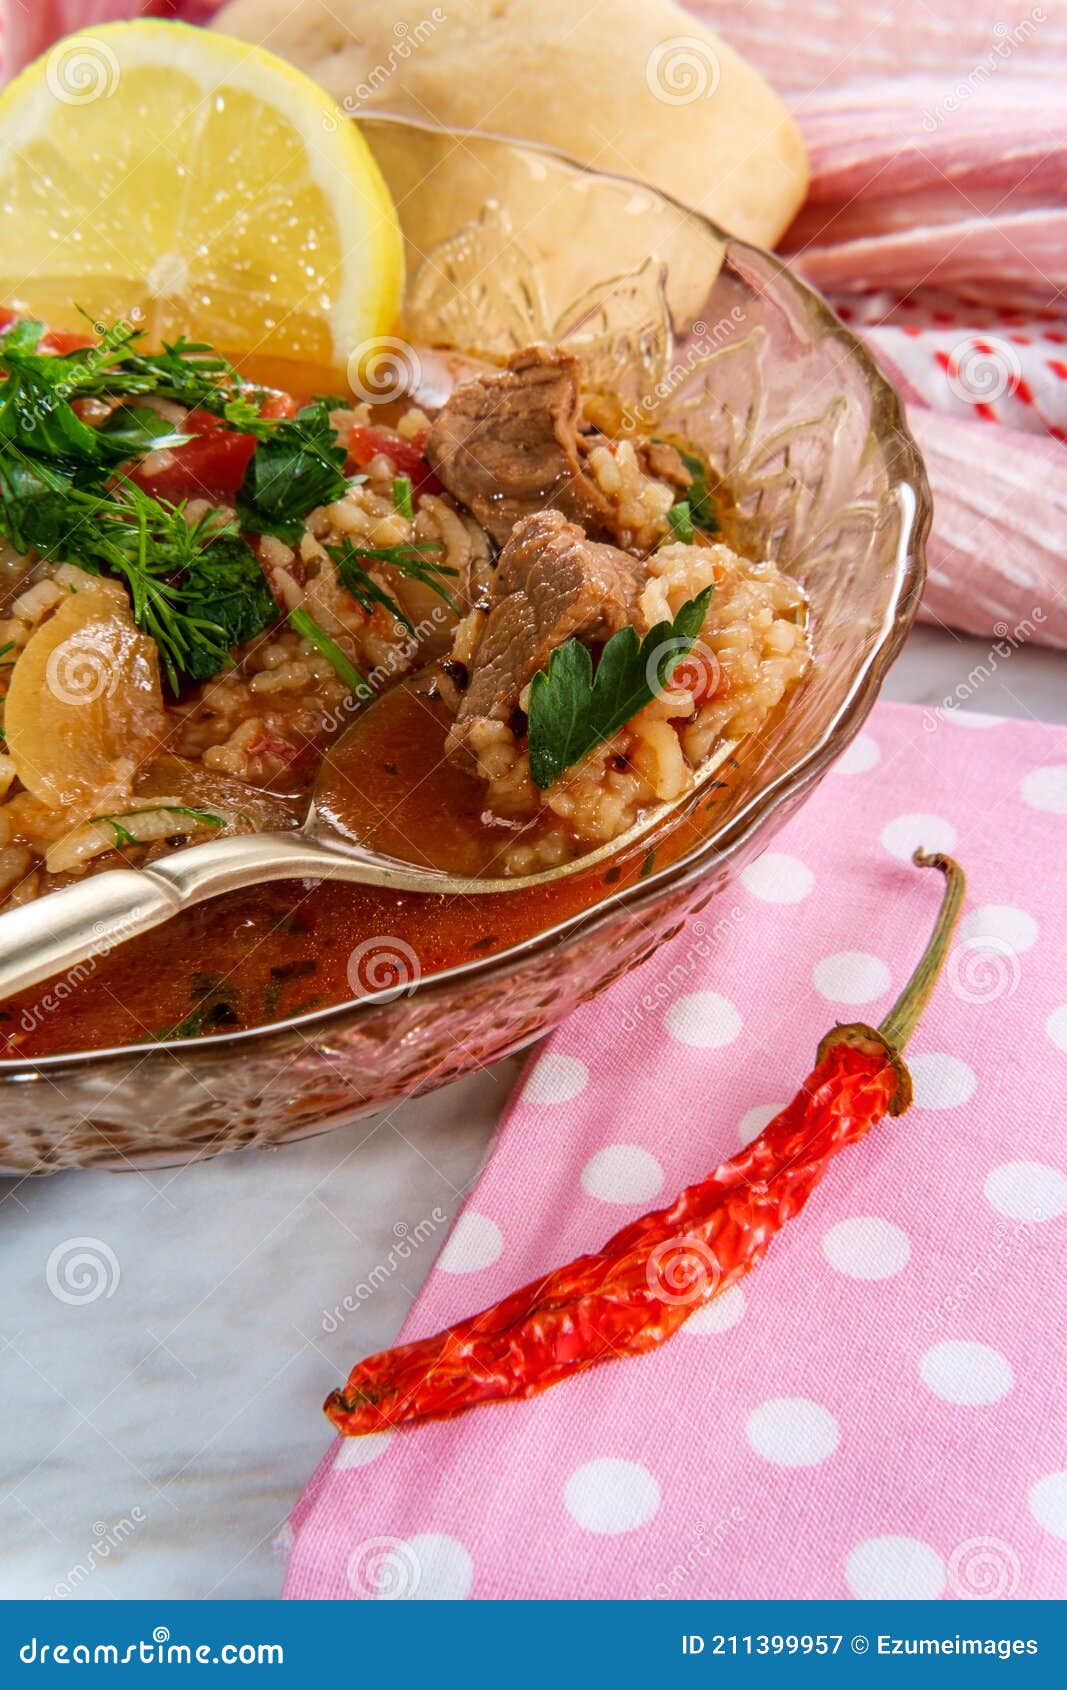 Georgian Kharcho Beef Soup stock image. Image of kitchen - 211399957